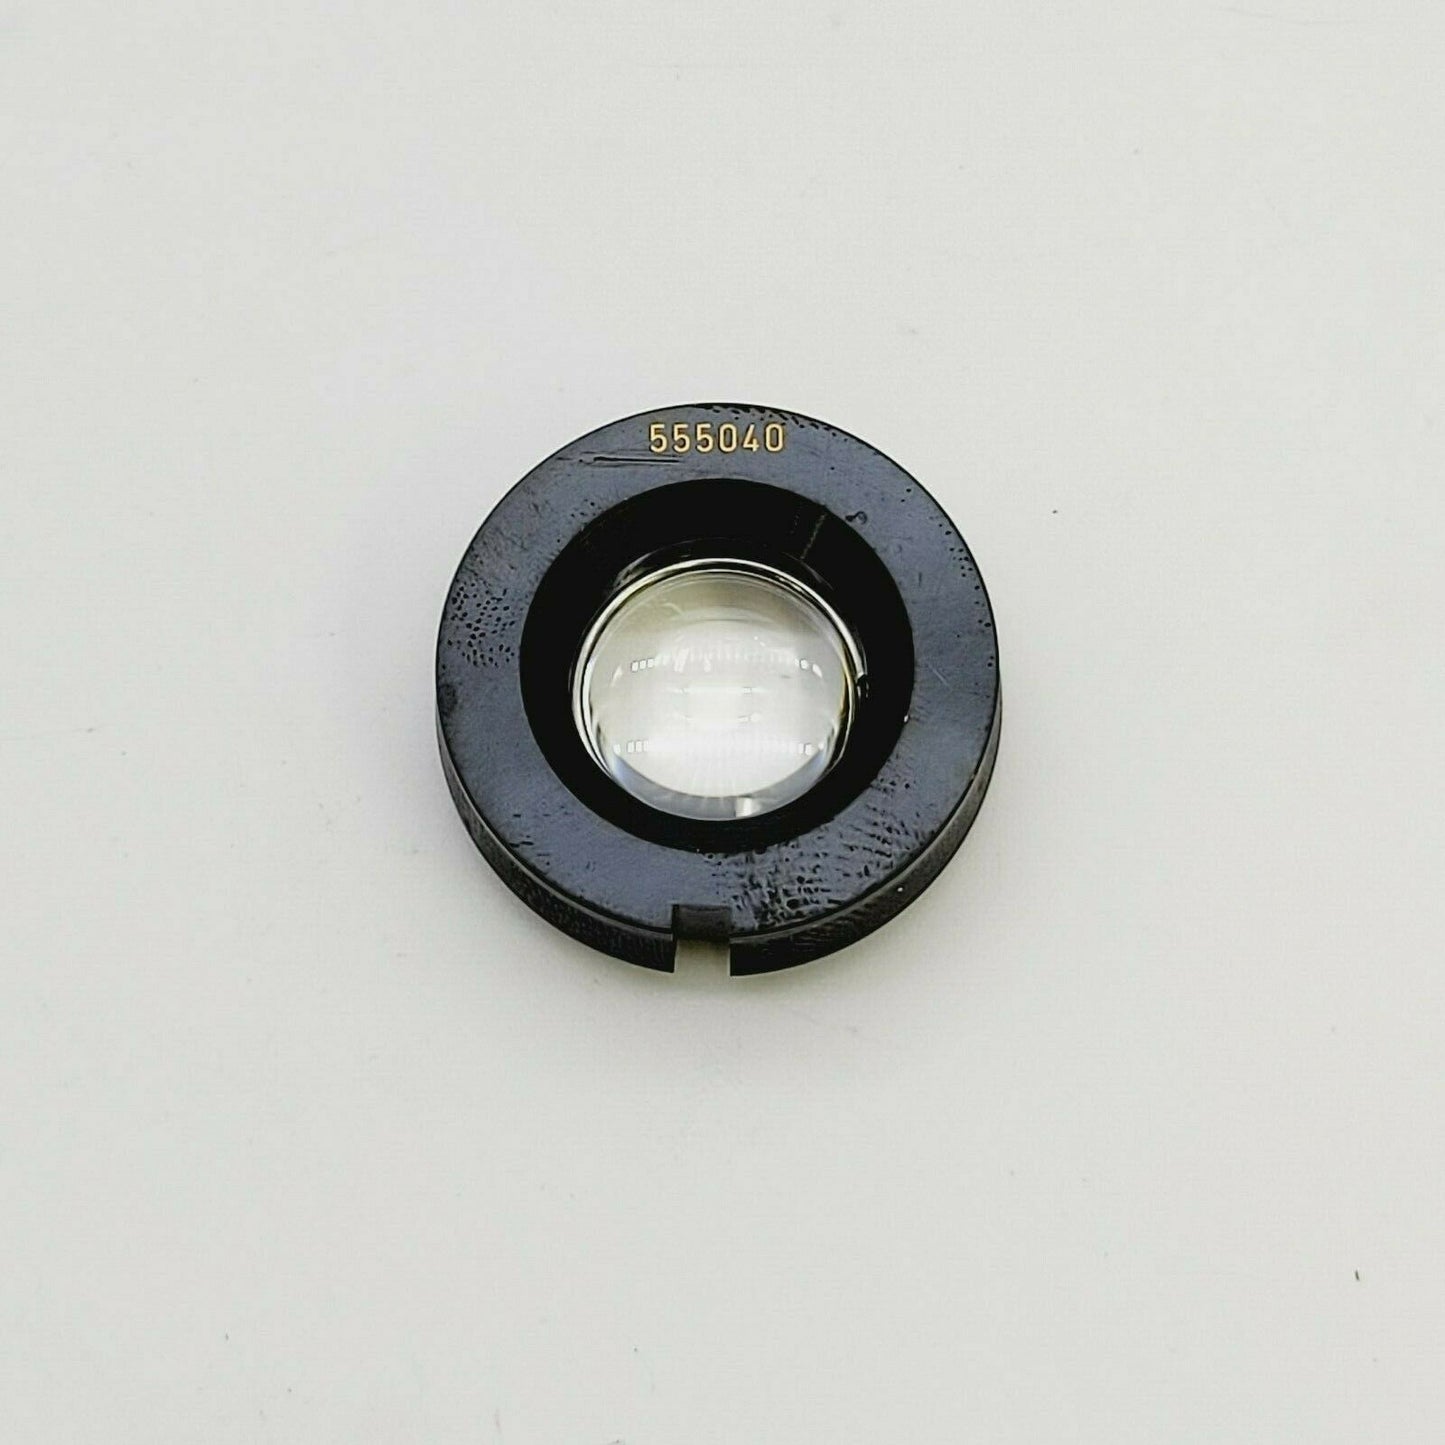 Leica Microscope Auxiliary Lens for Objective 2.5x for UC-Condenser 555040 - microscopemarketplace